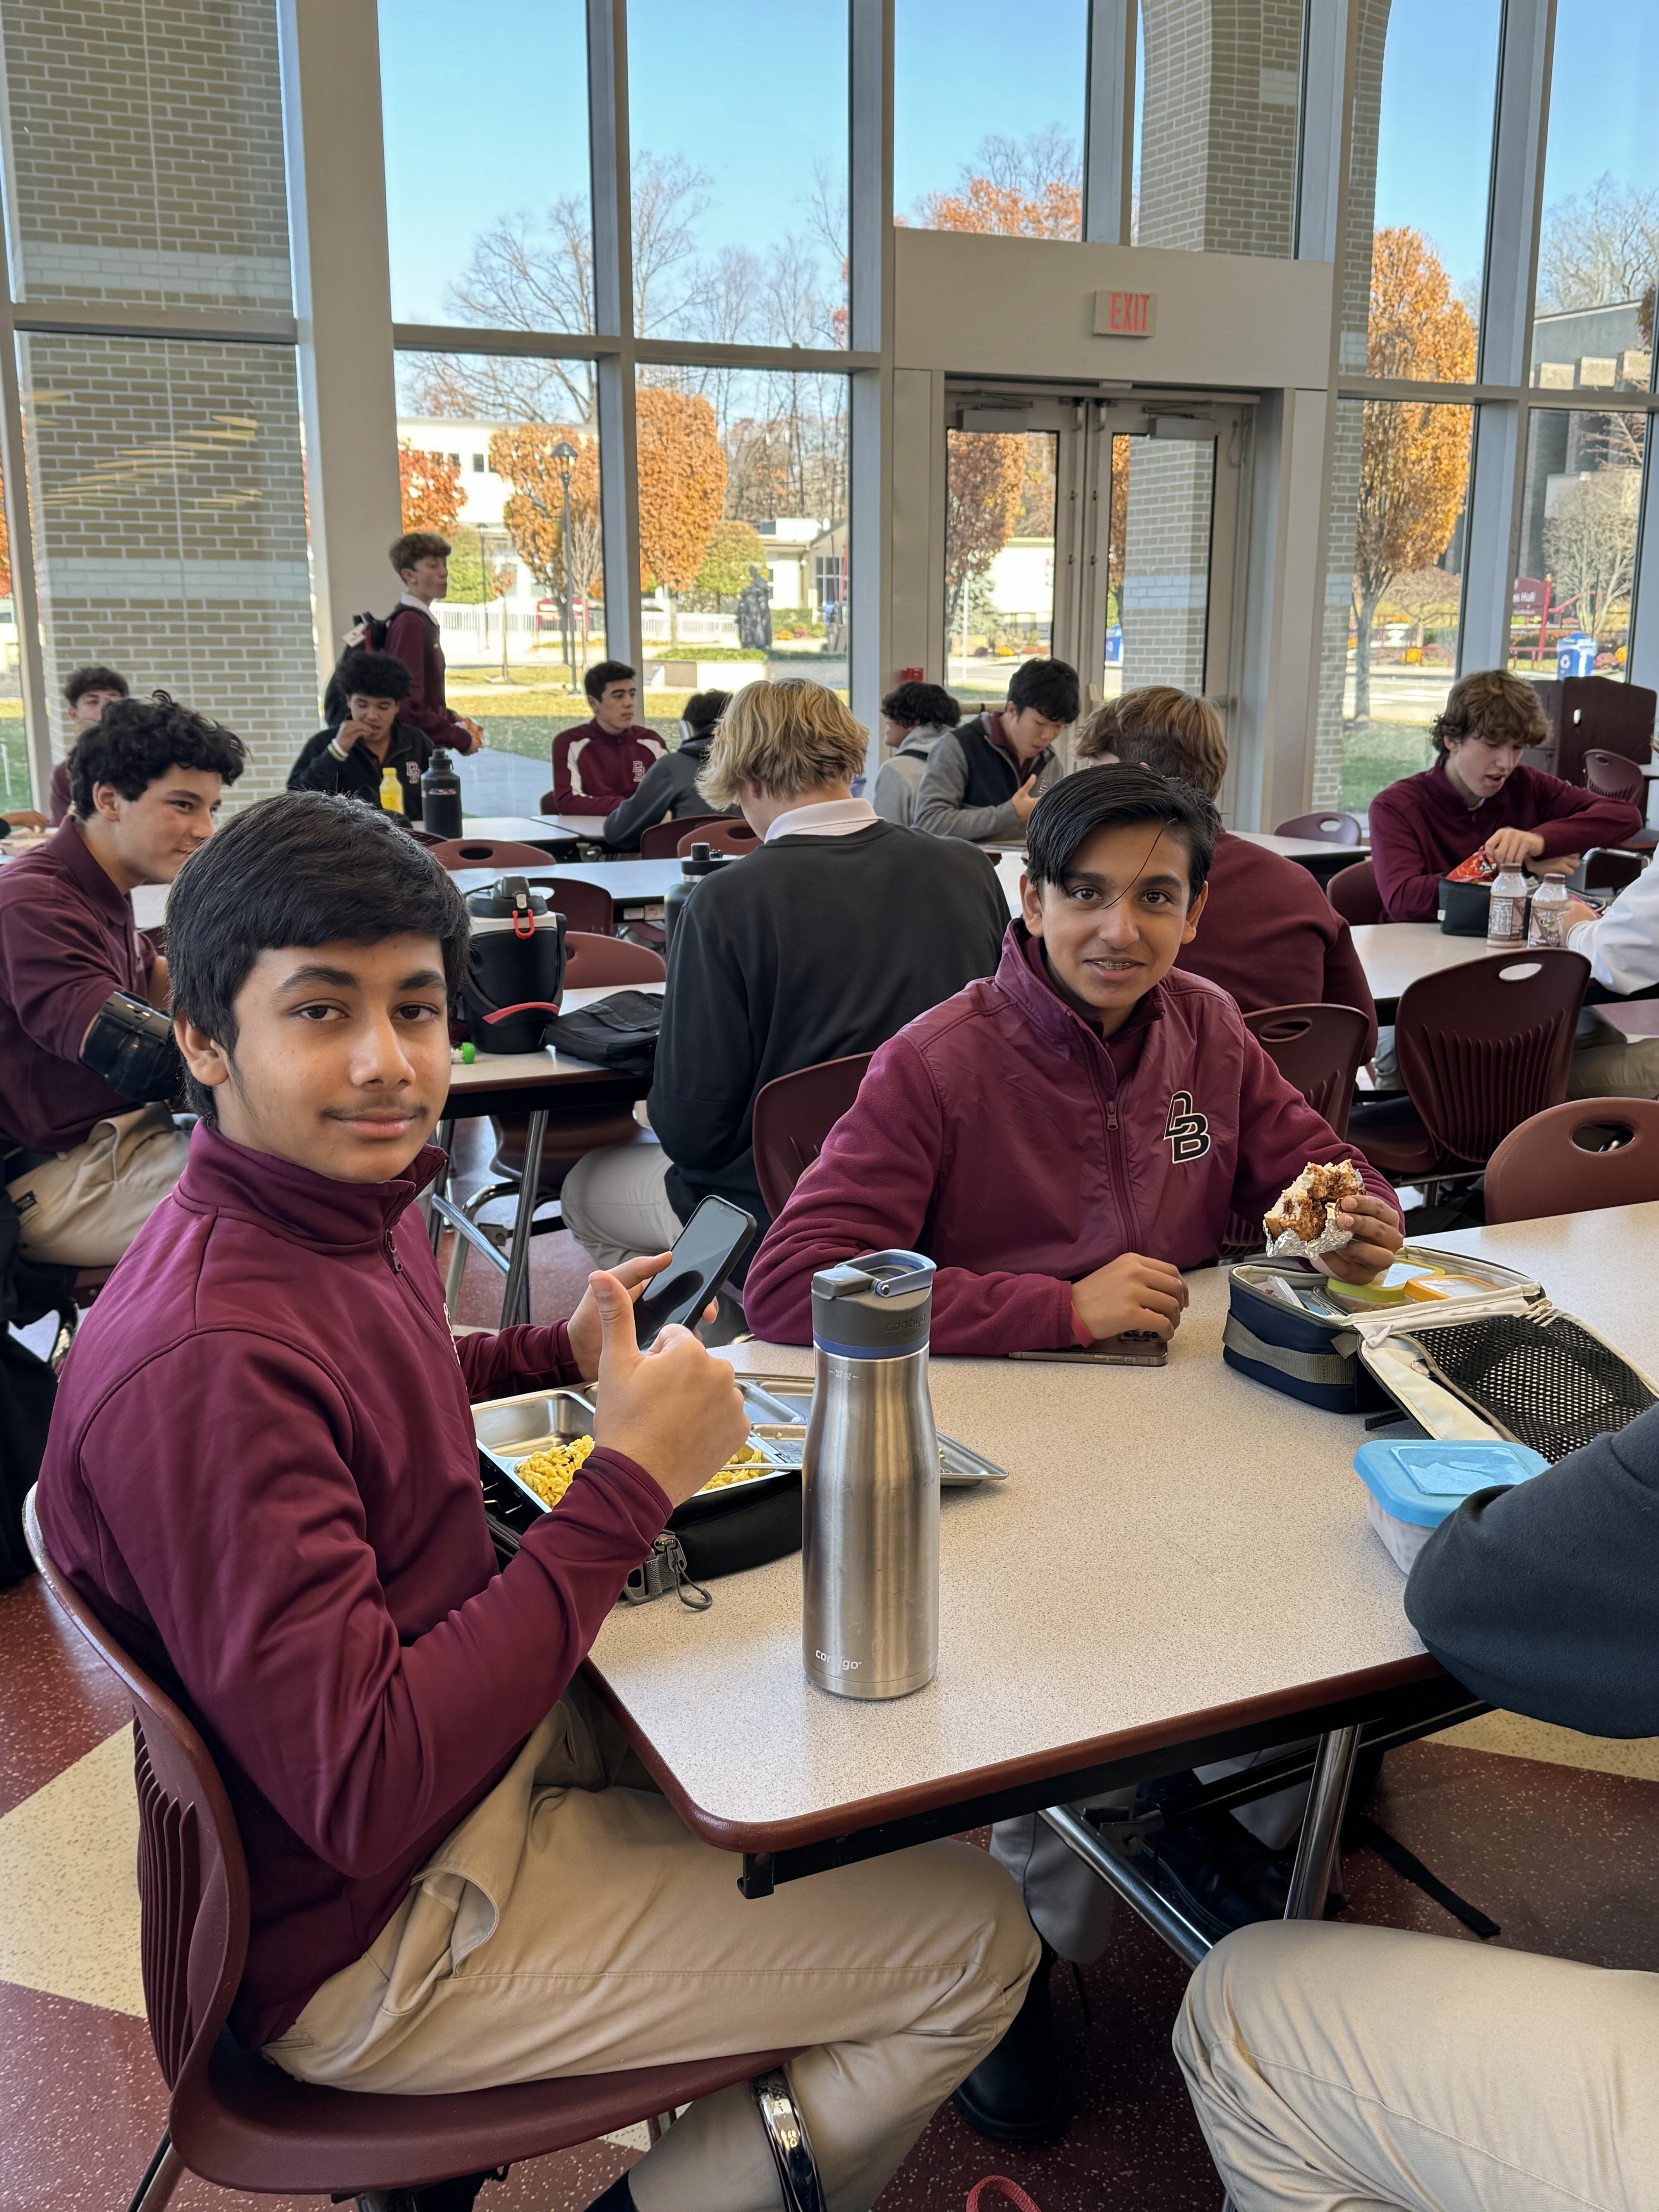 Students Eating Lunch